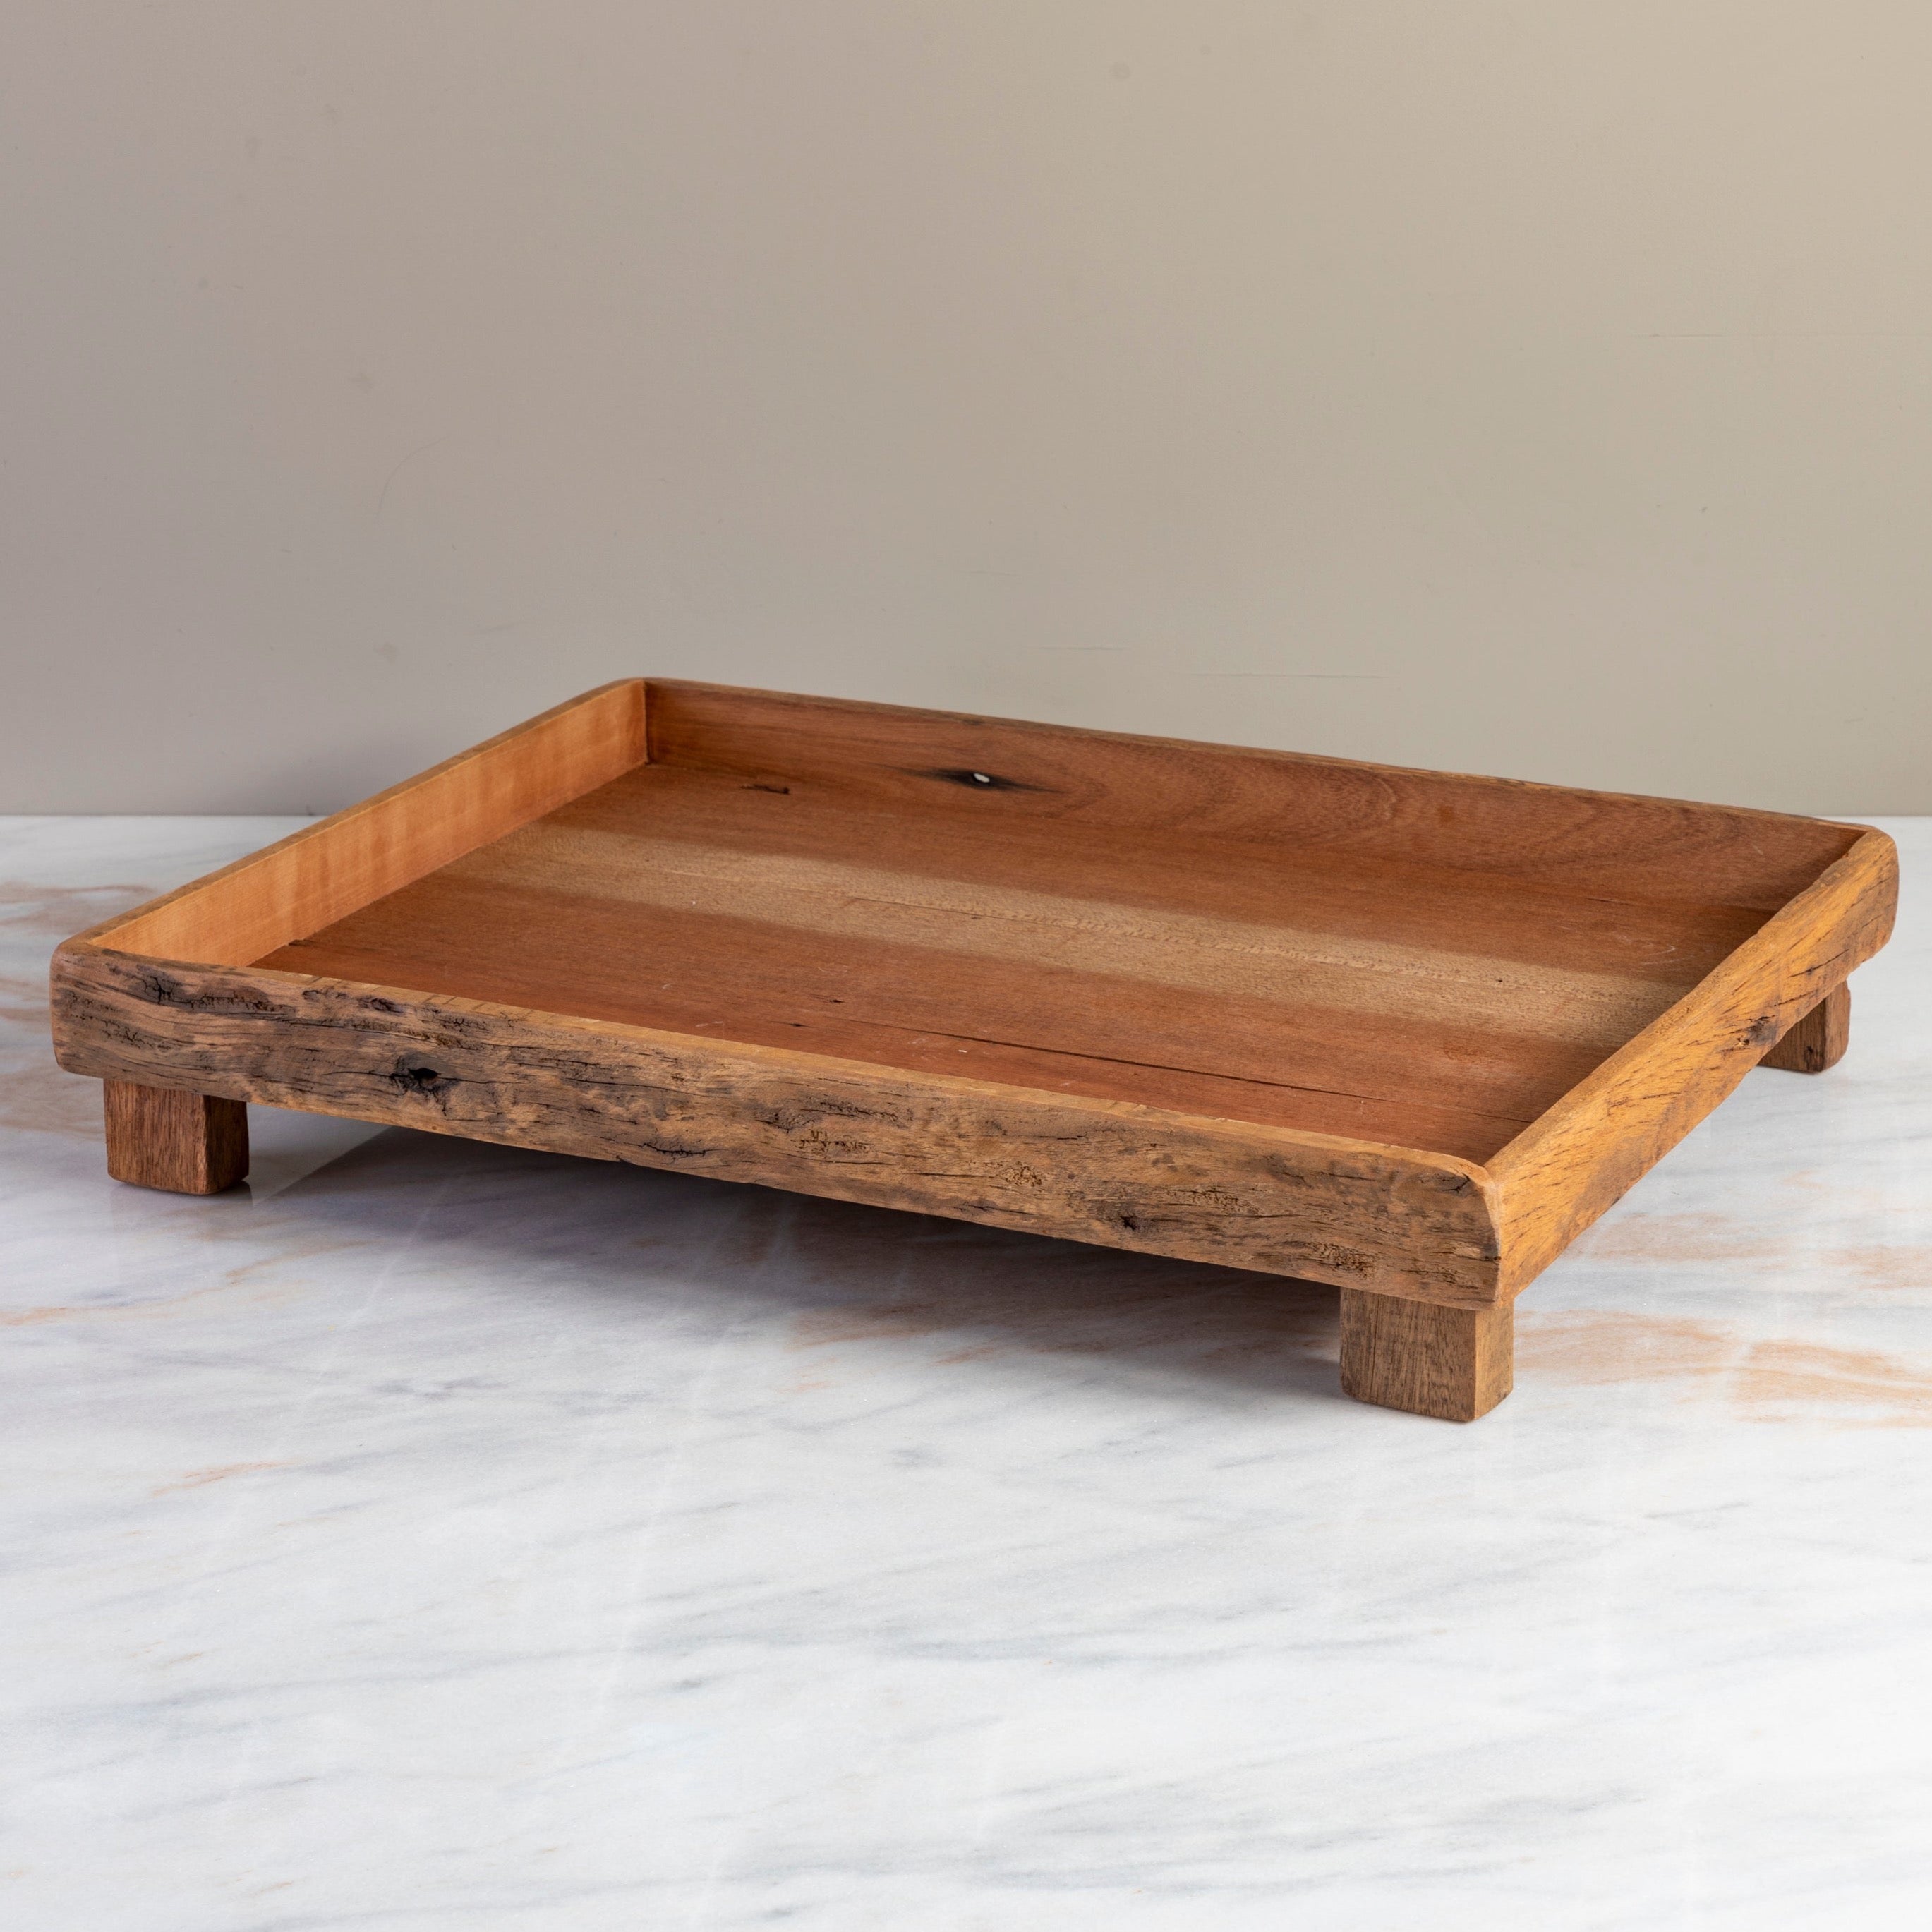 Reclaimed Wood Rectangular Footed Tray, Large